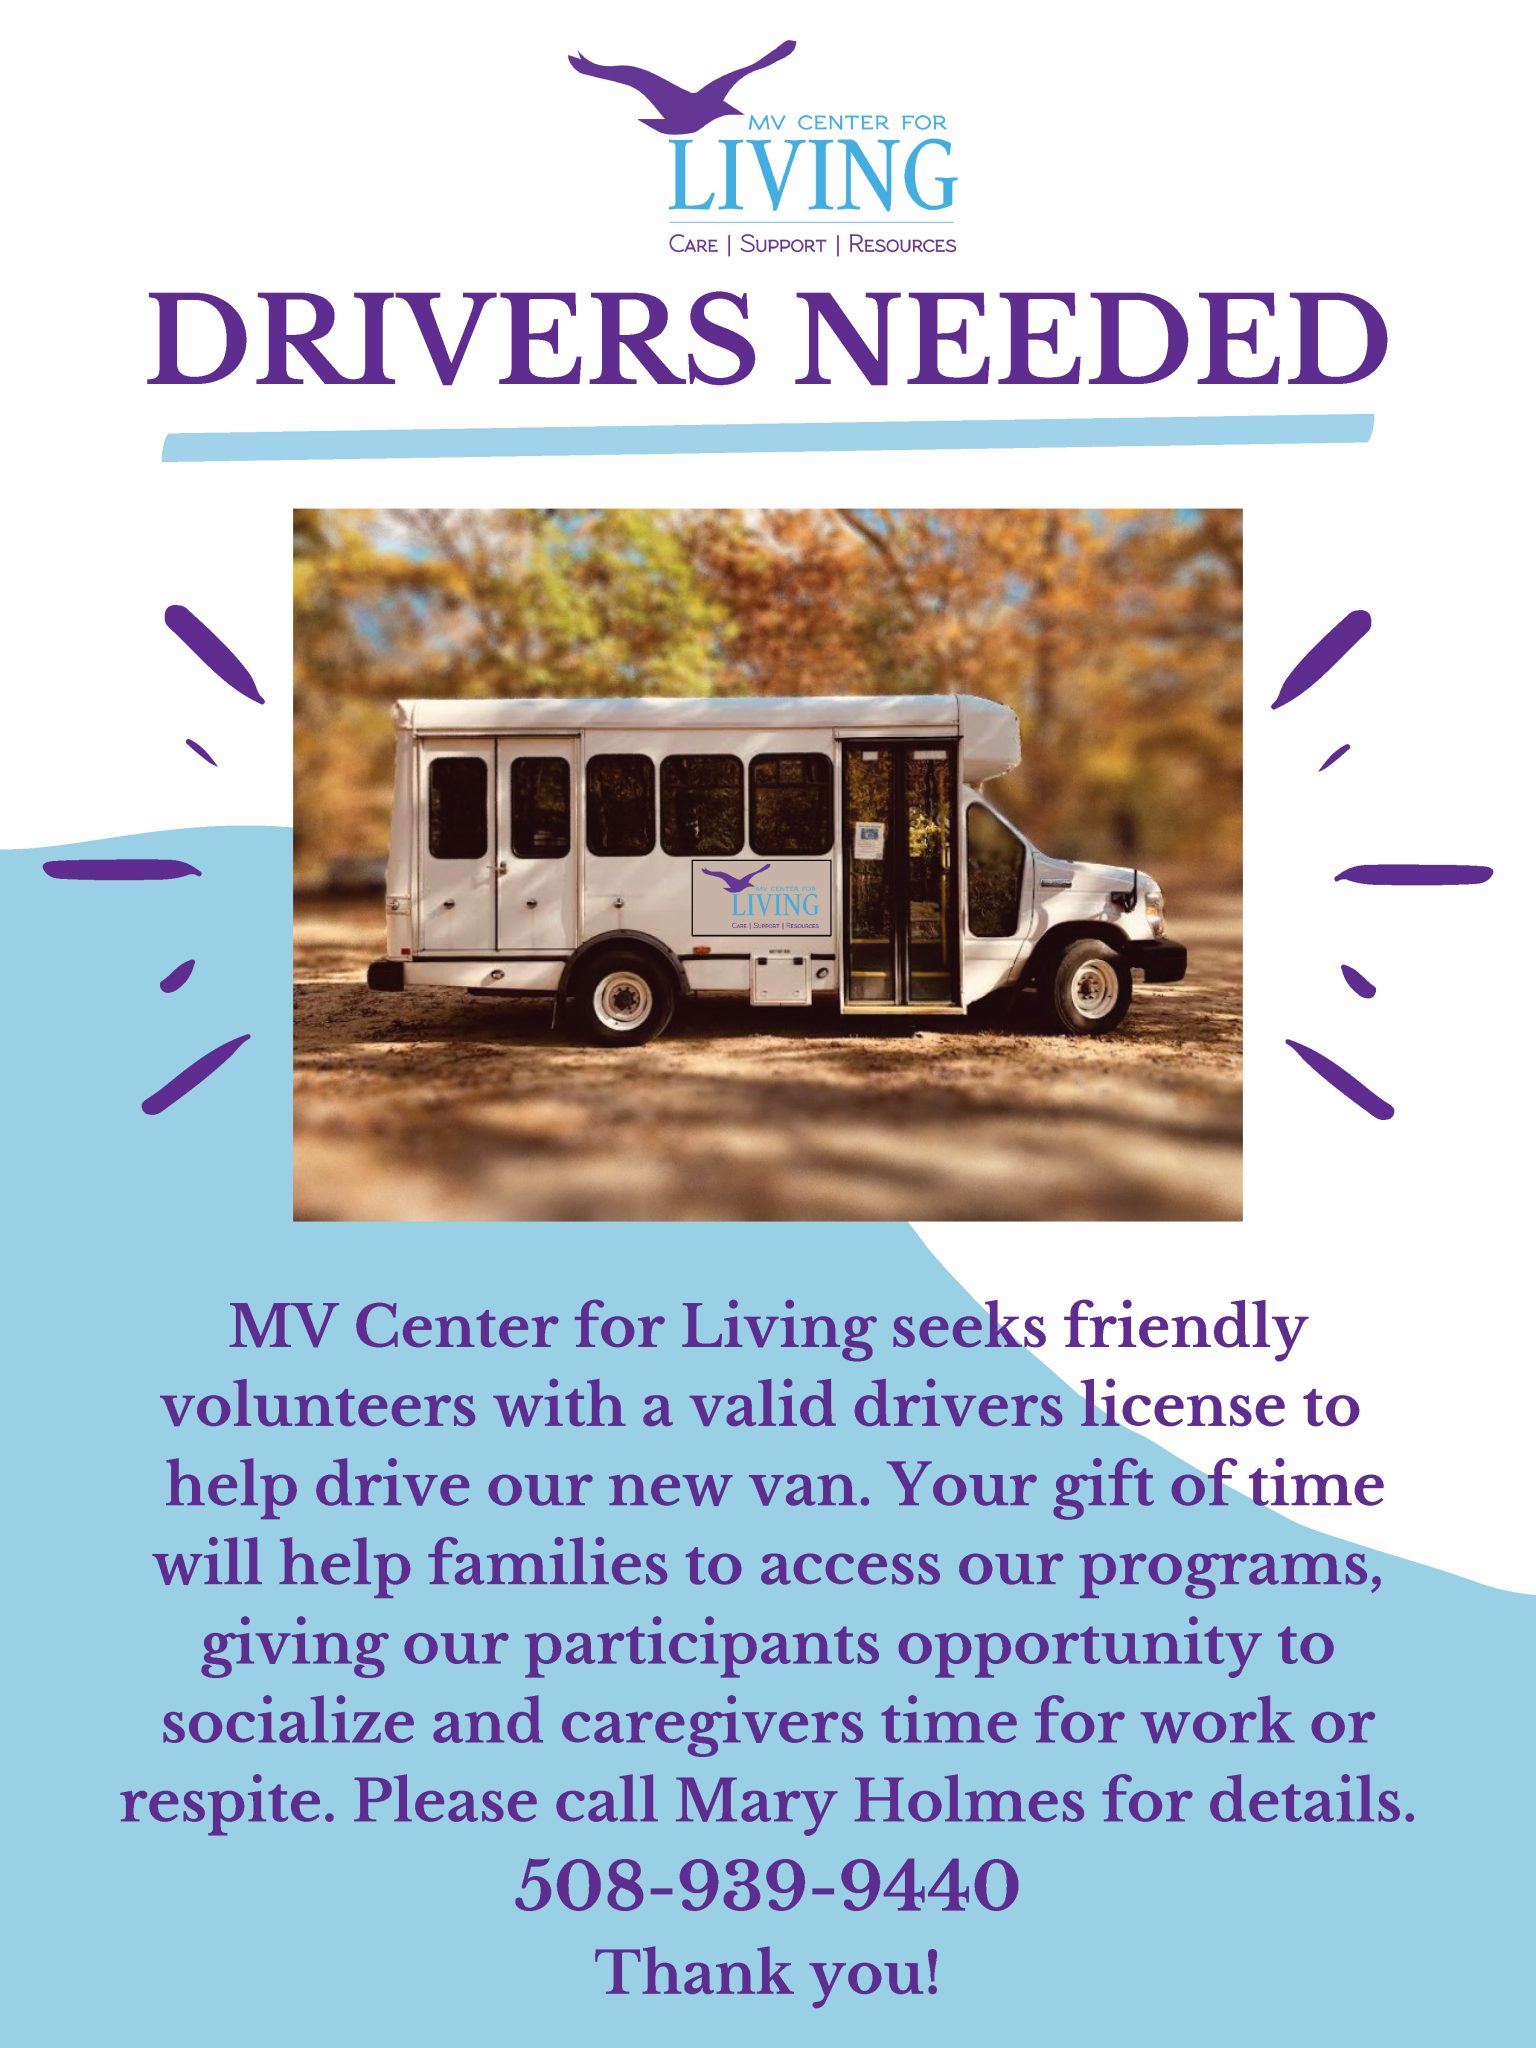 MV Center for Living seeks friendly volunteers with a valid drivers license to help drive our new van. Your gift of time will help families to access our programs, giving our participants opportunity to socialize and caregivers time for work or respite. Please call Mary Holmes for details. 508-939-9440